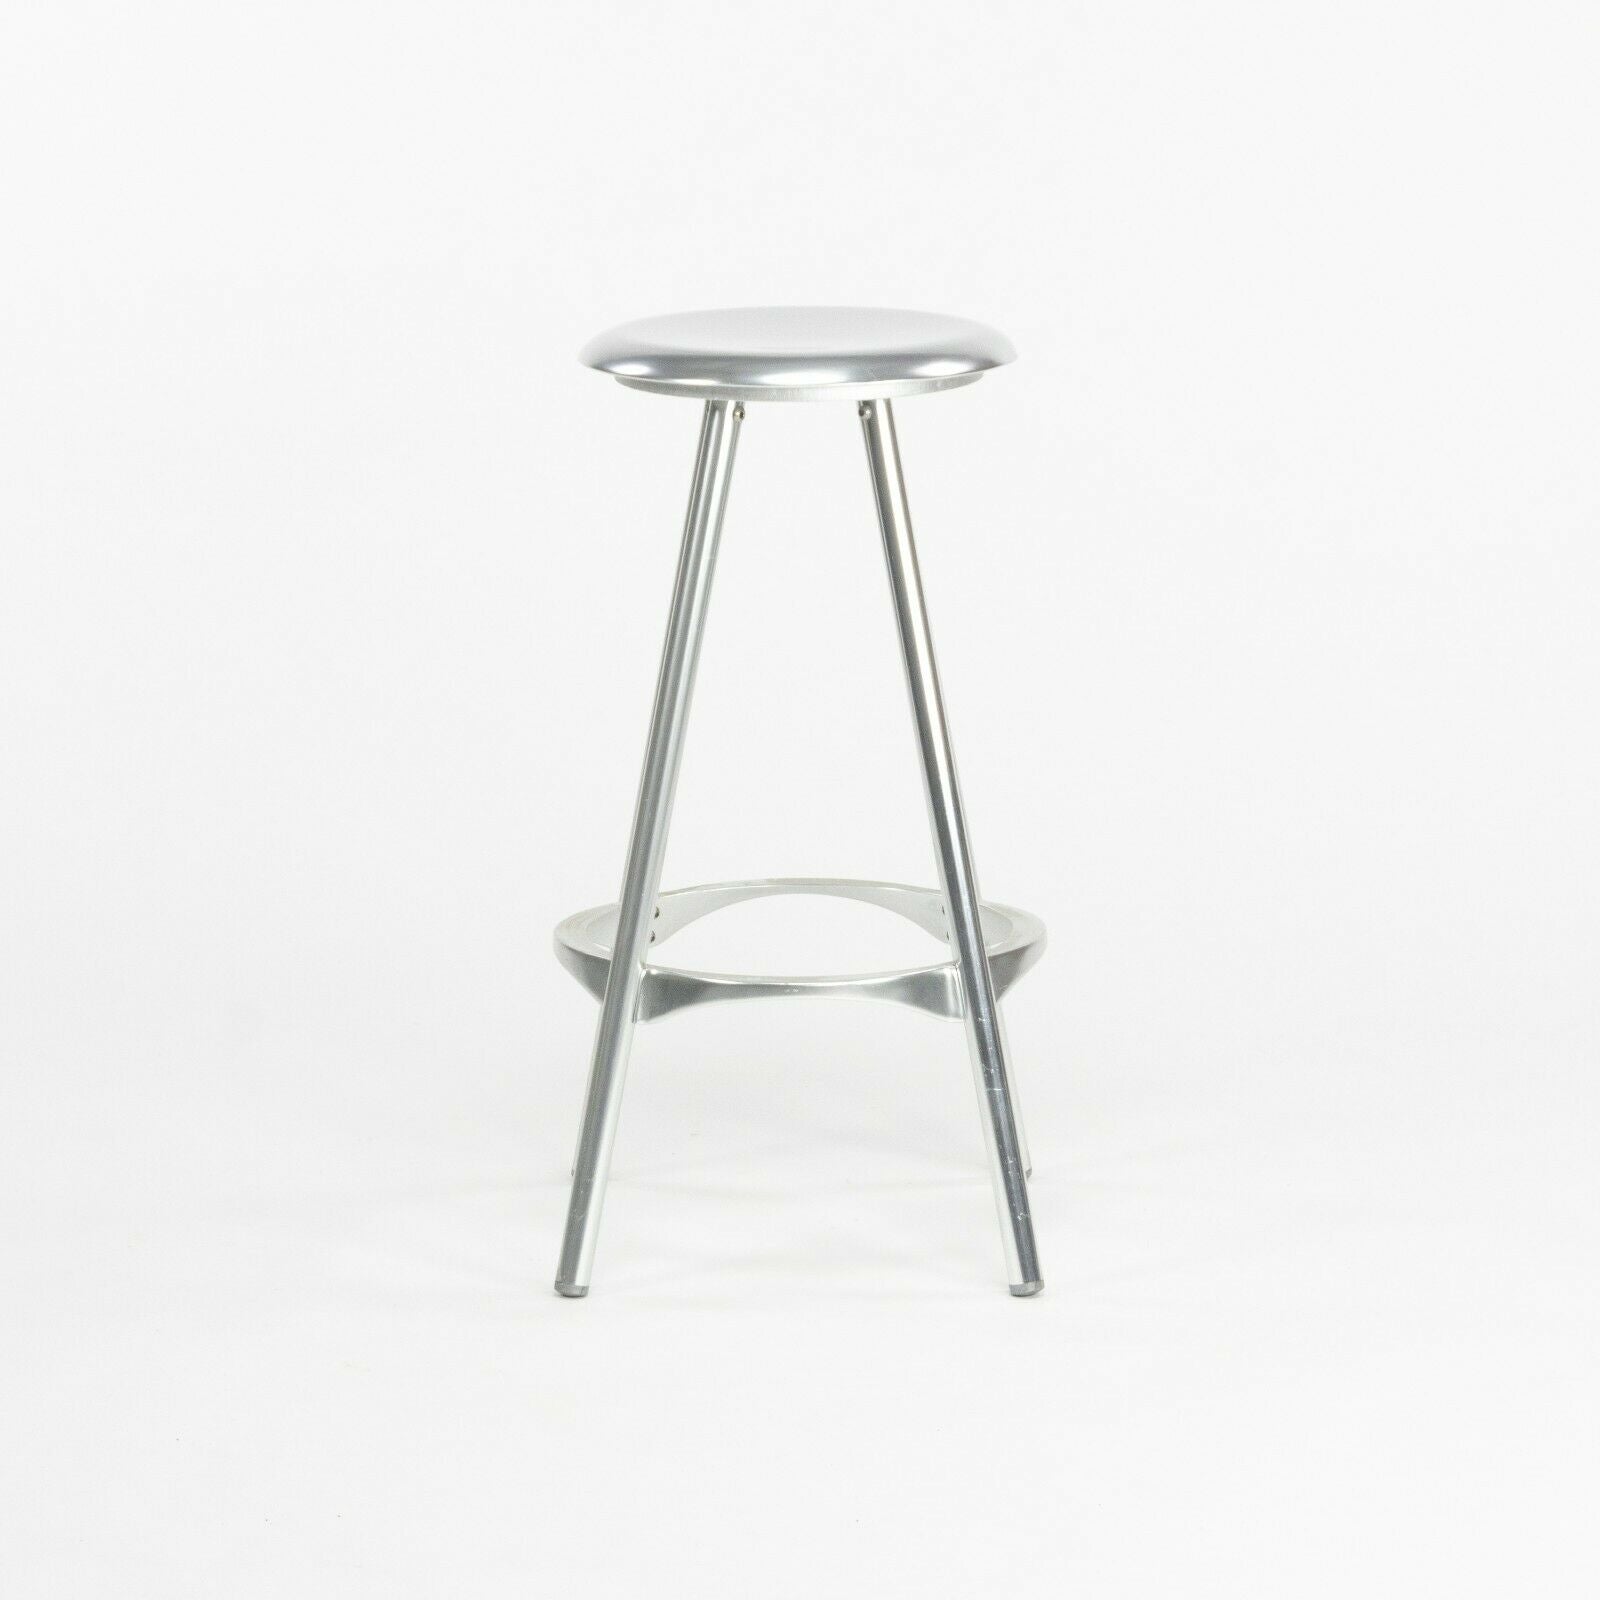 SOLD Set of Four Amat 3 for Knoll Studio Counter Stools Made and Designed in Spain